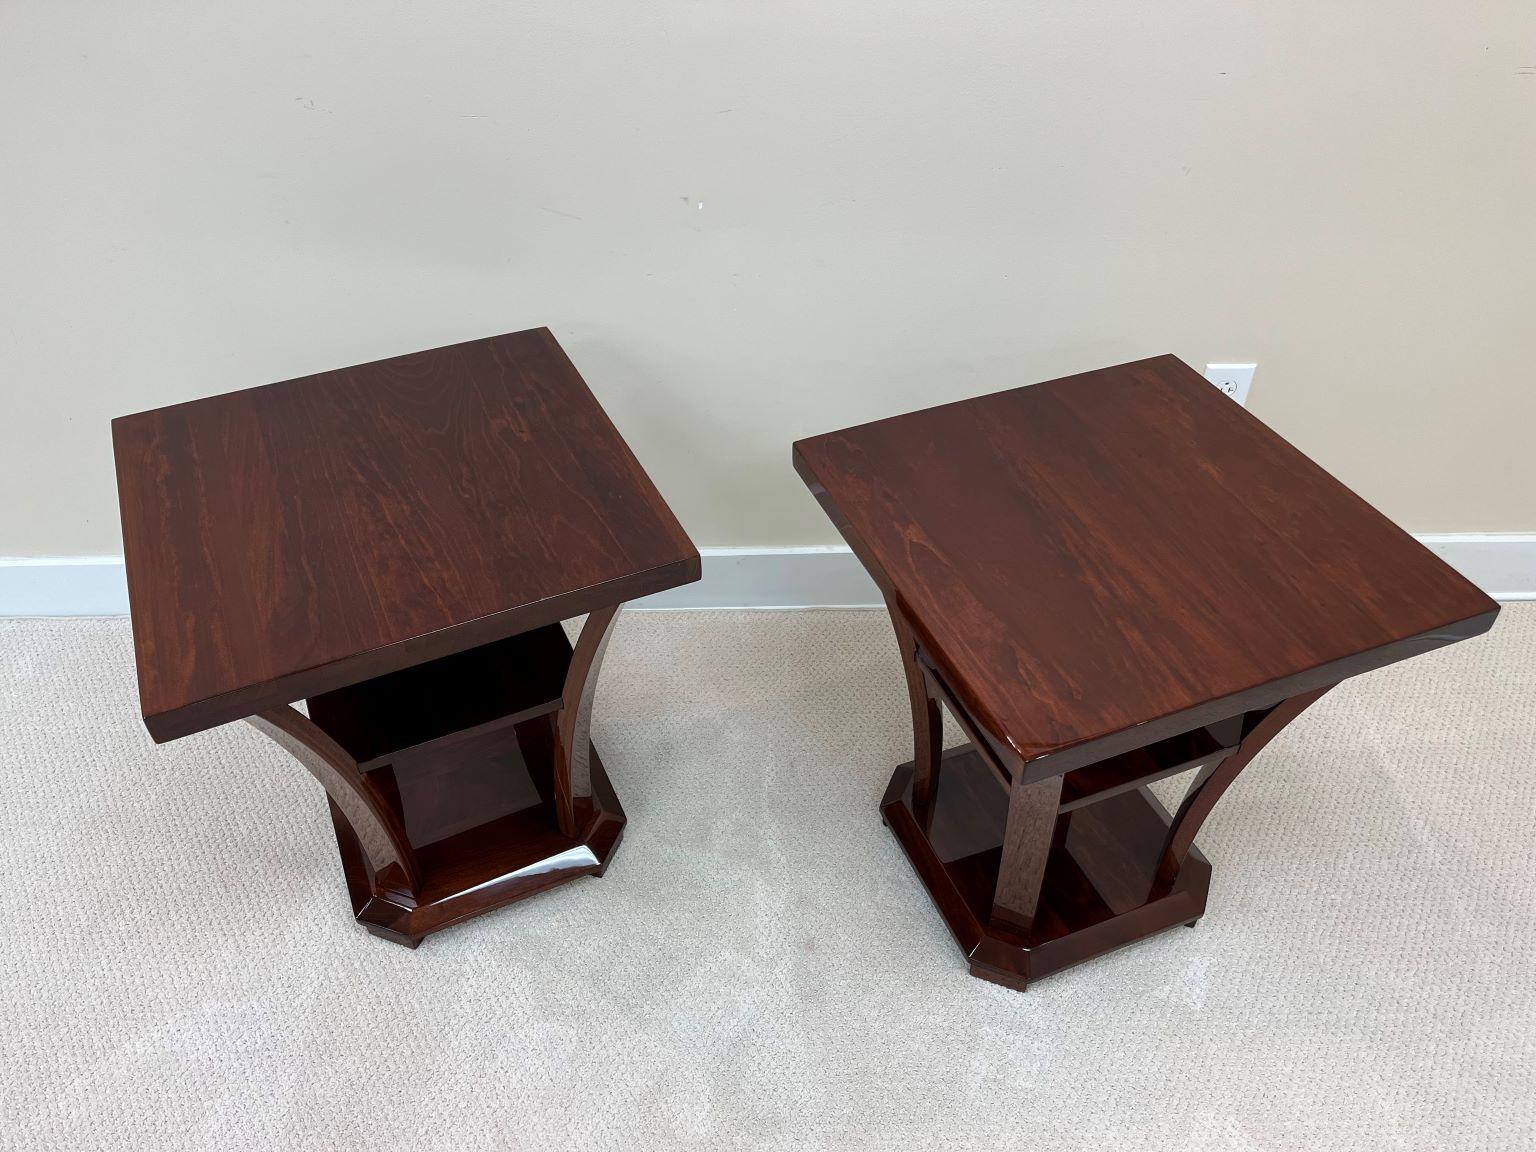 Mid-20th Century Pair Of Art Deco Modernist Square Top Three Tier Side Tables, American C. 1930's For Sale